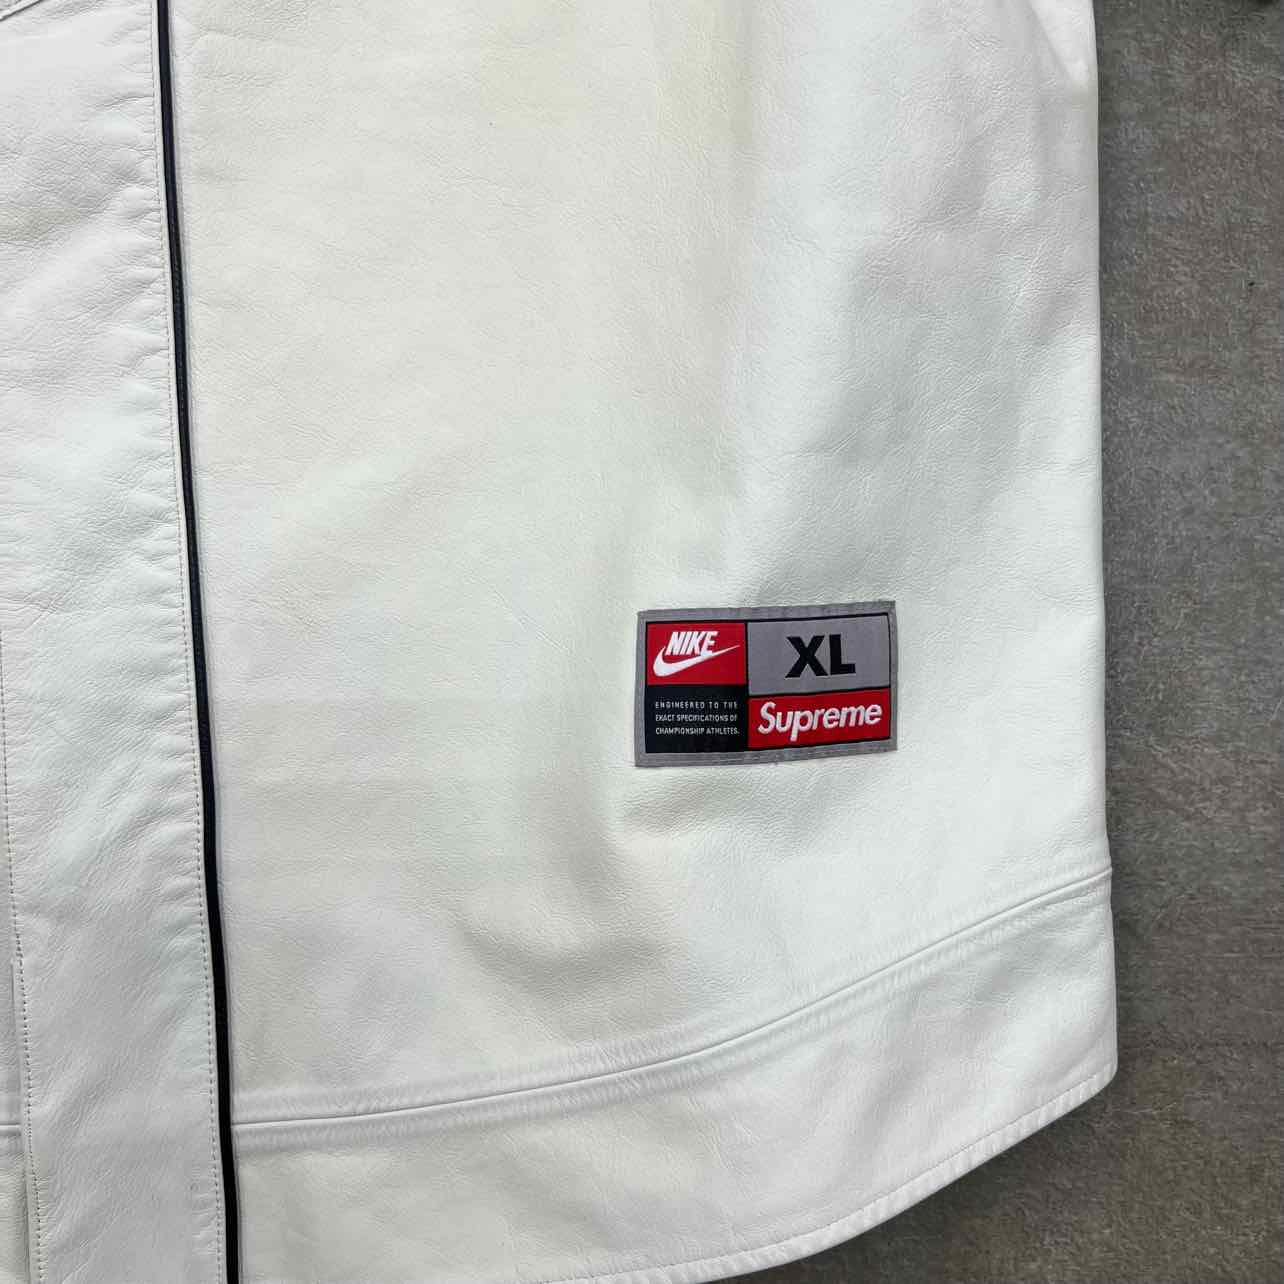 Supreme Jersey &quot;NIKE WHITE&quot; White Used Size XL